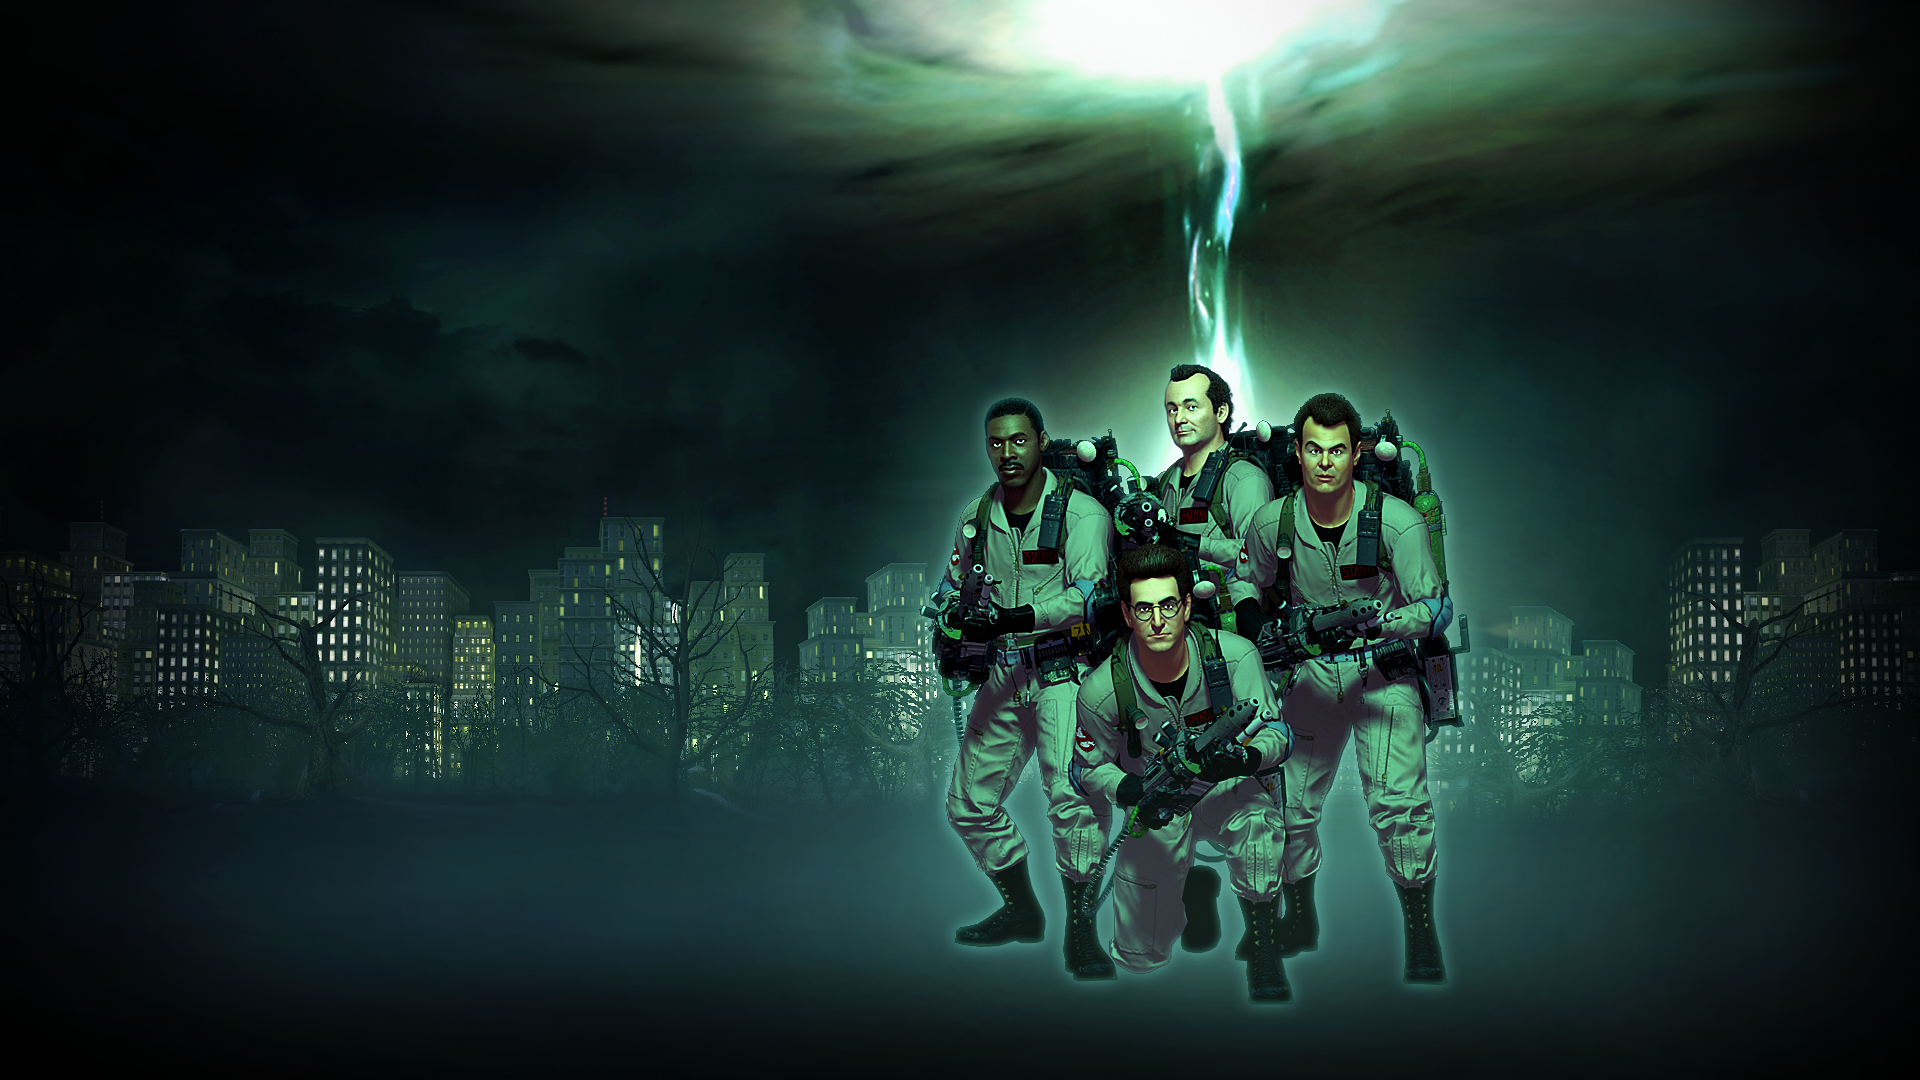 38 Ghostbusters HD Wallpapers | Backgrounds - Wallpaper Abyss